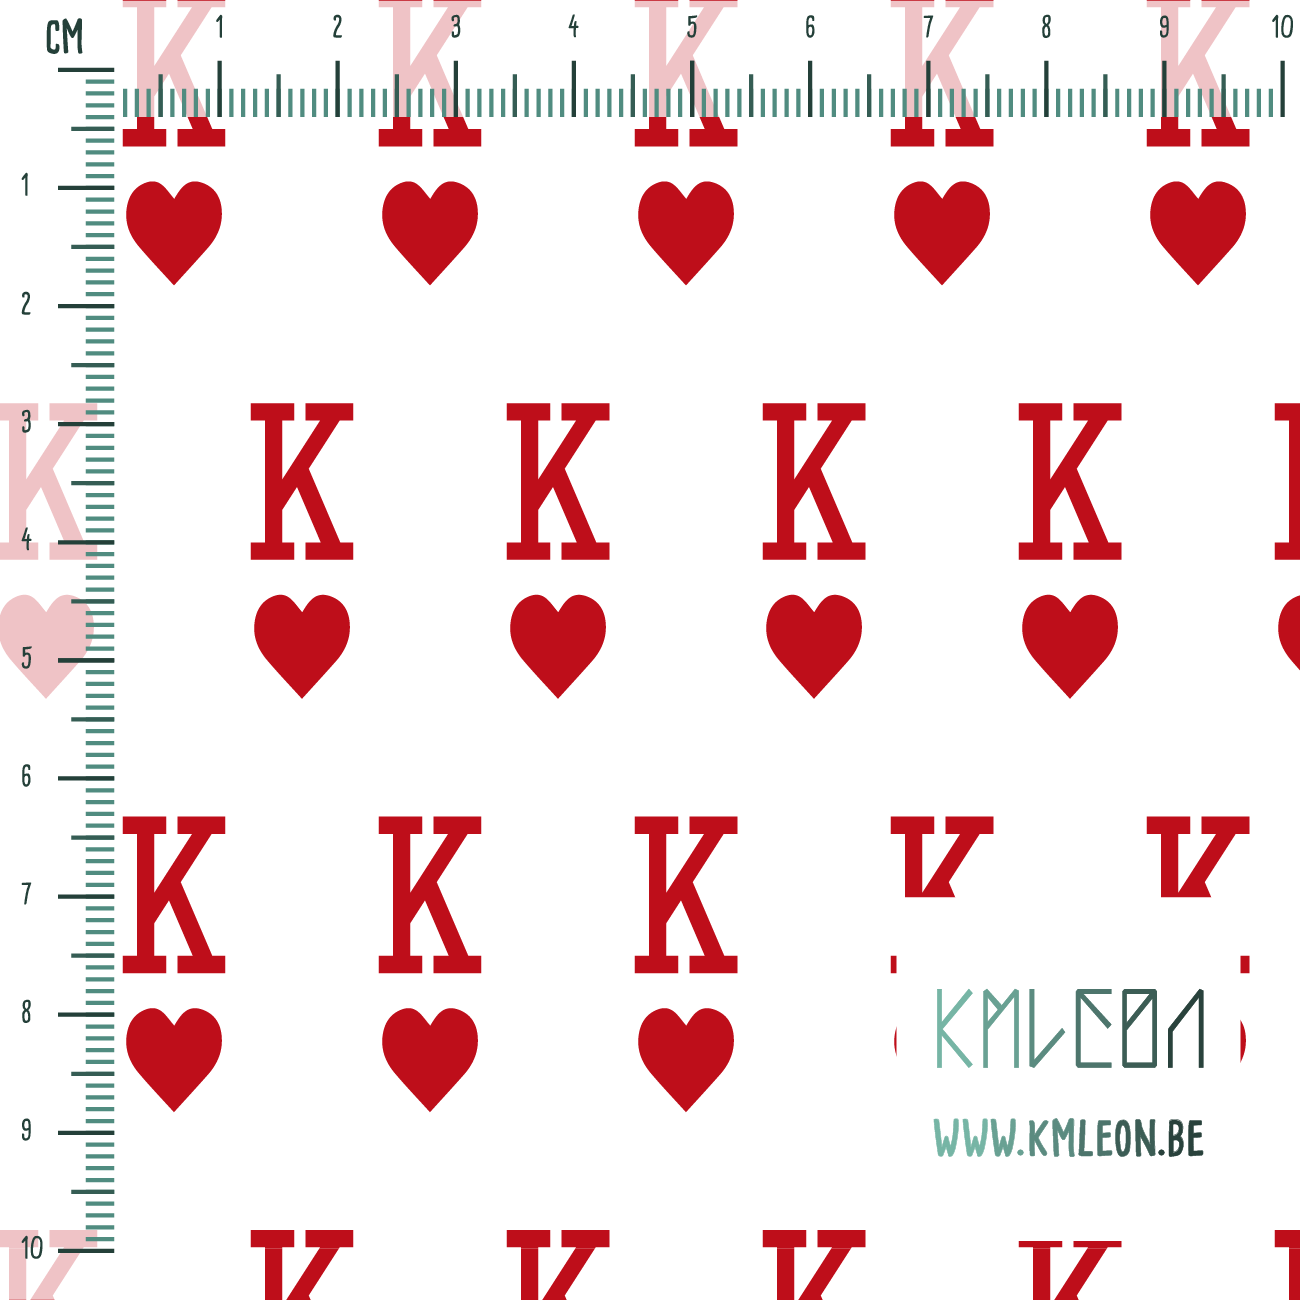 King of hearts fabric